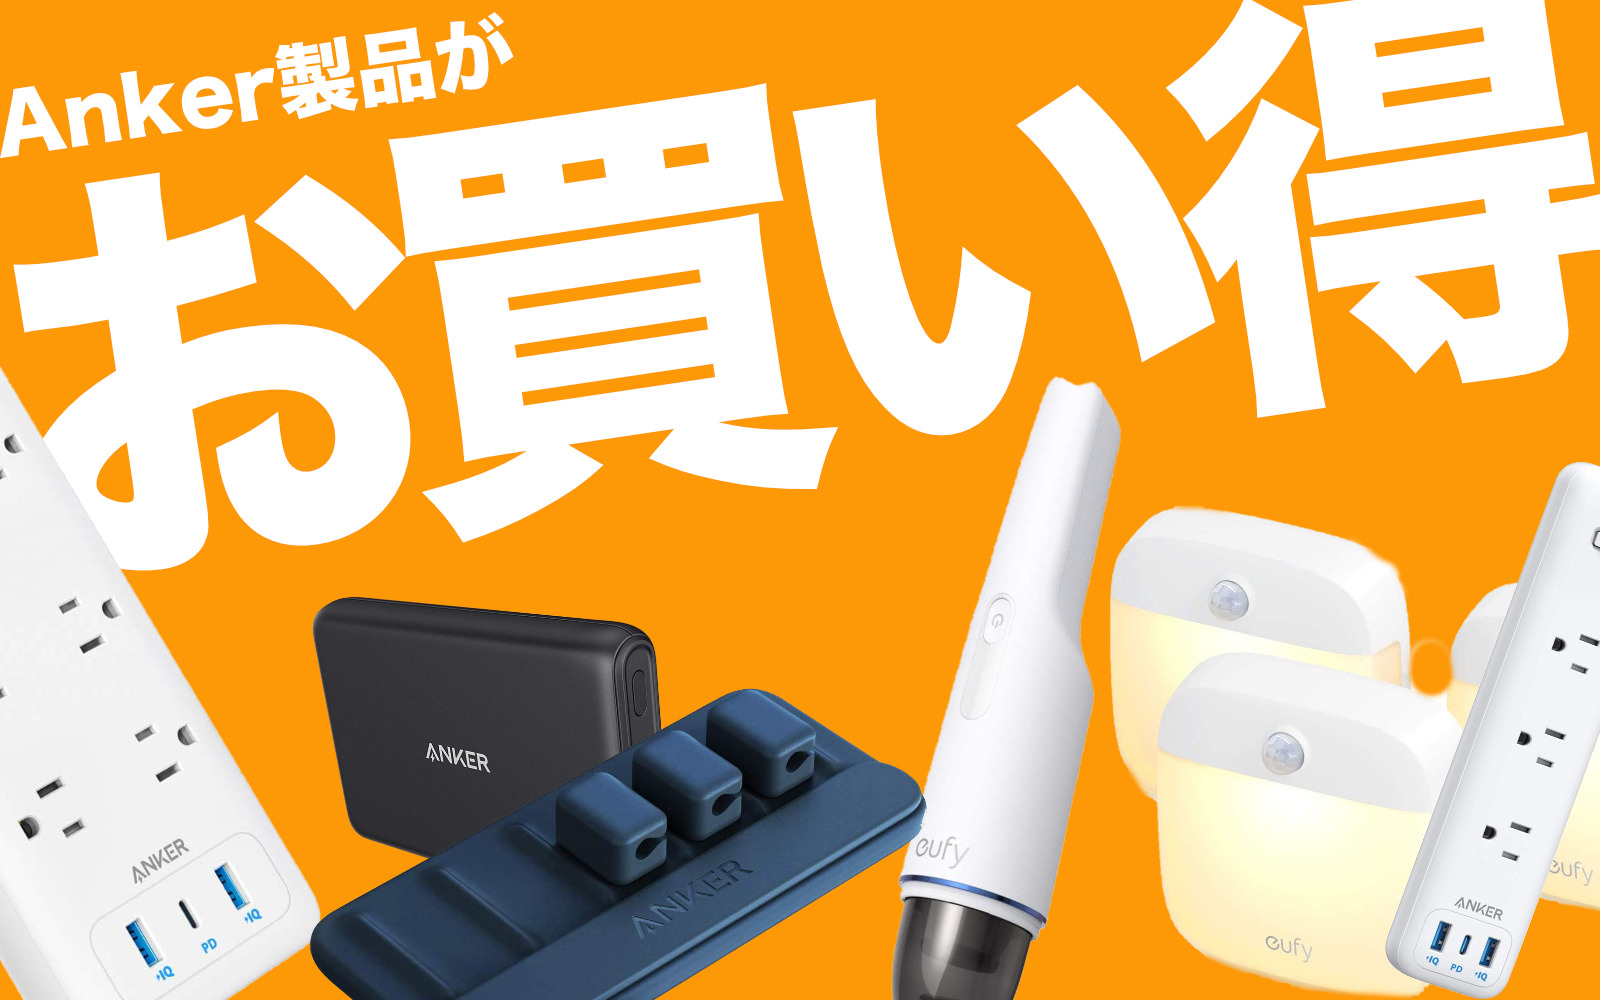 Anker-Products-on-sale.jpg